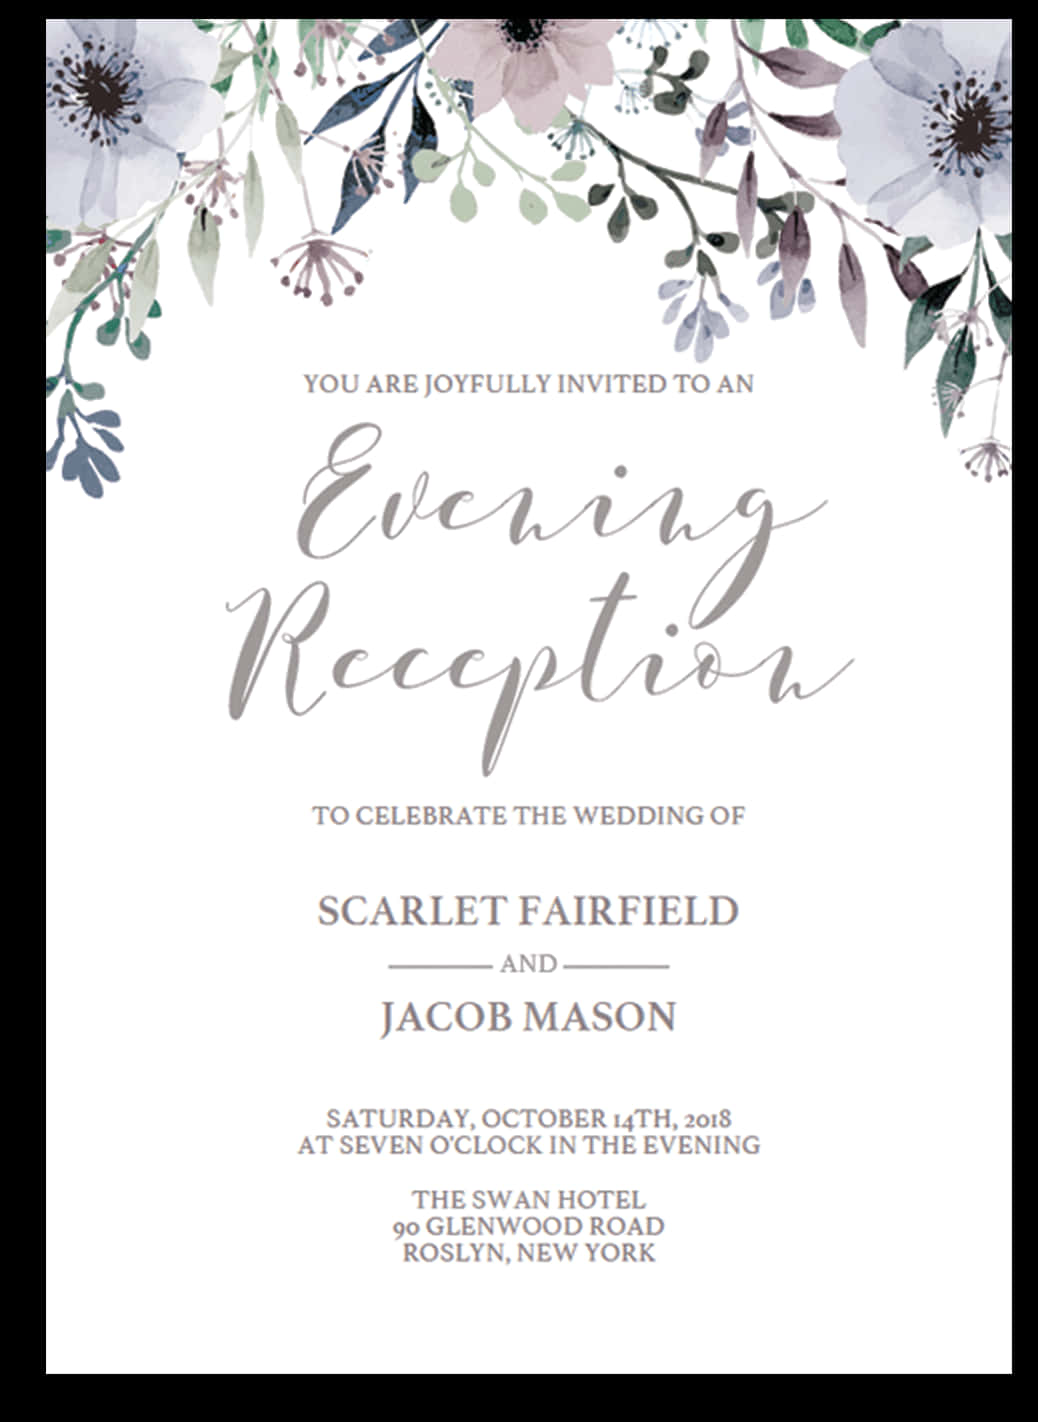 Wedding Card With Lavender Flowers